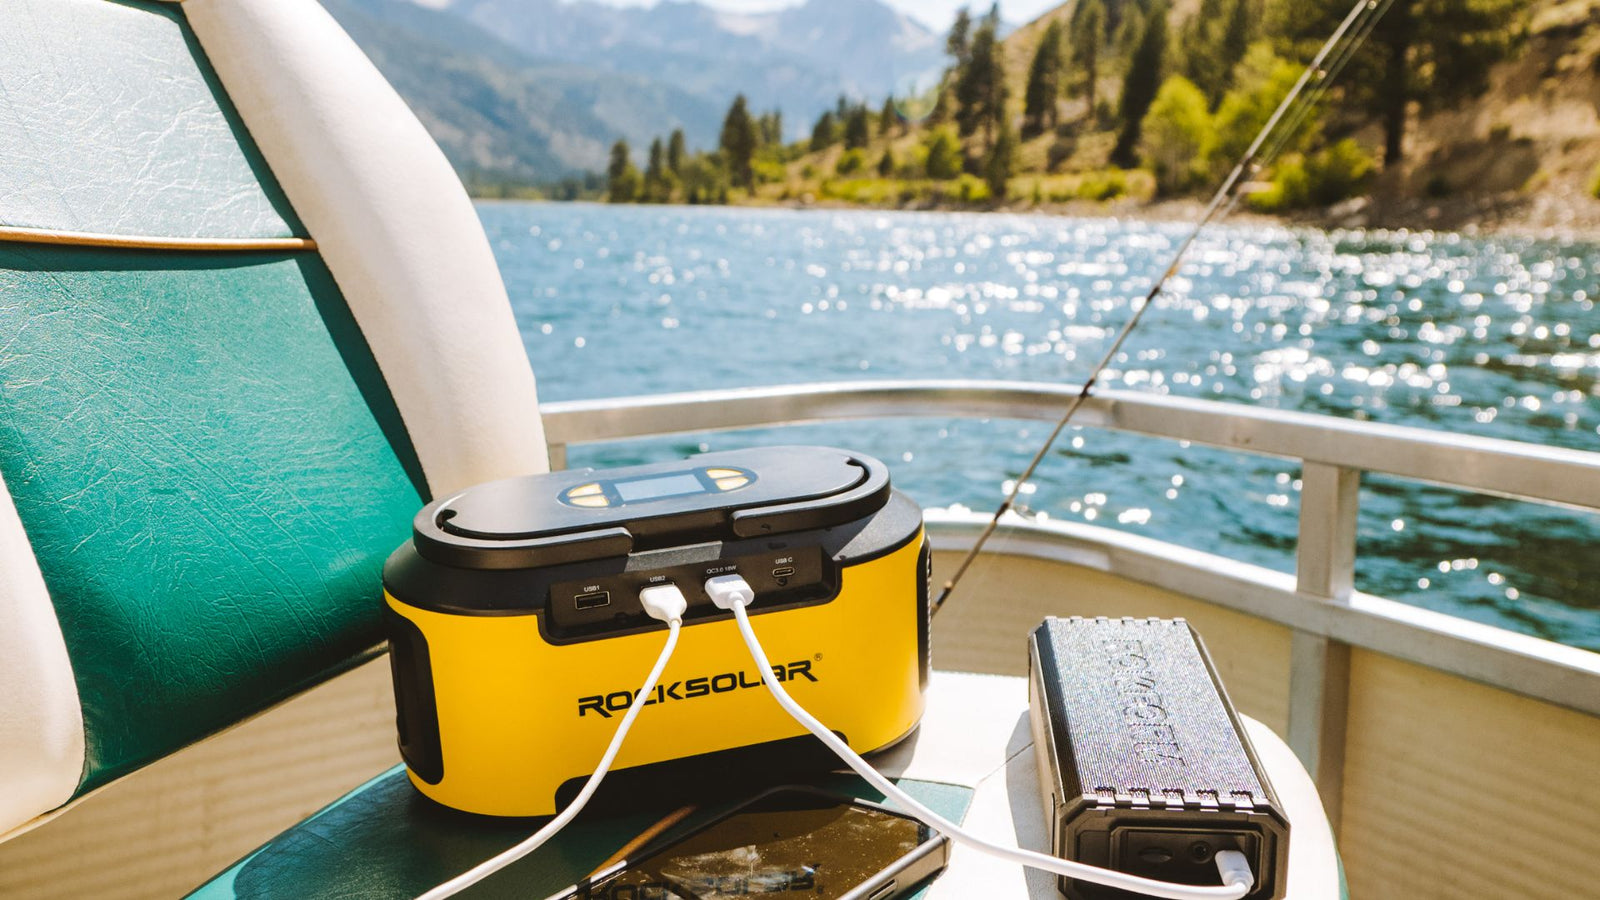 Choosing the Perfect Rocksolar Portable Power Station: A Buyer's Guide